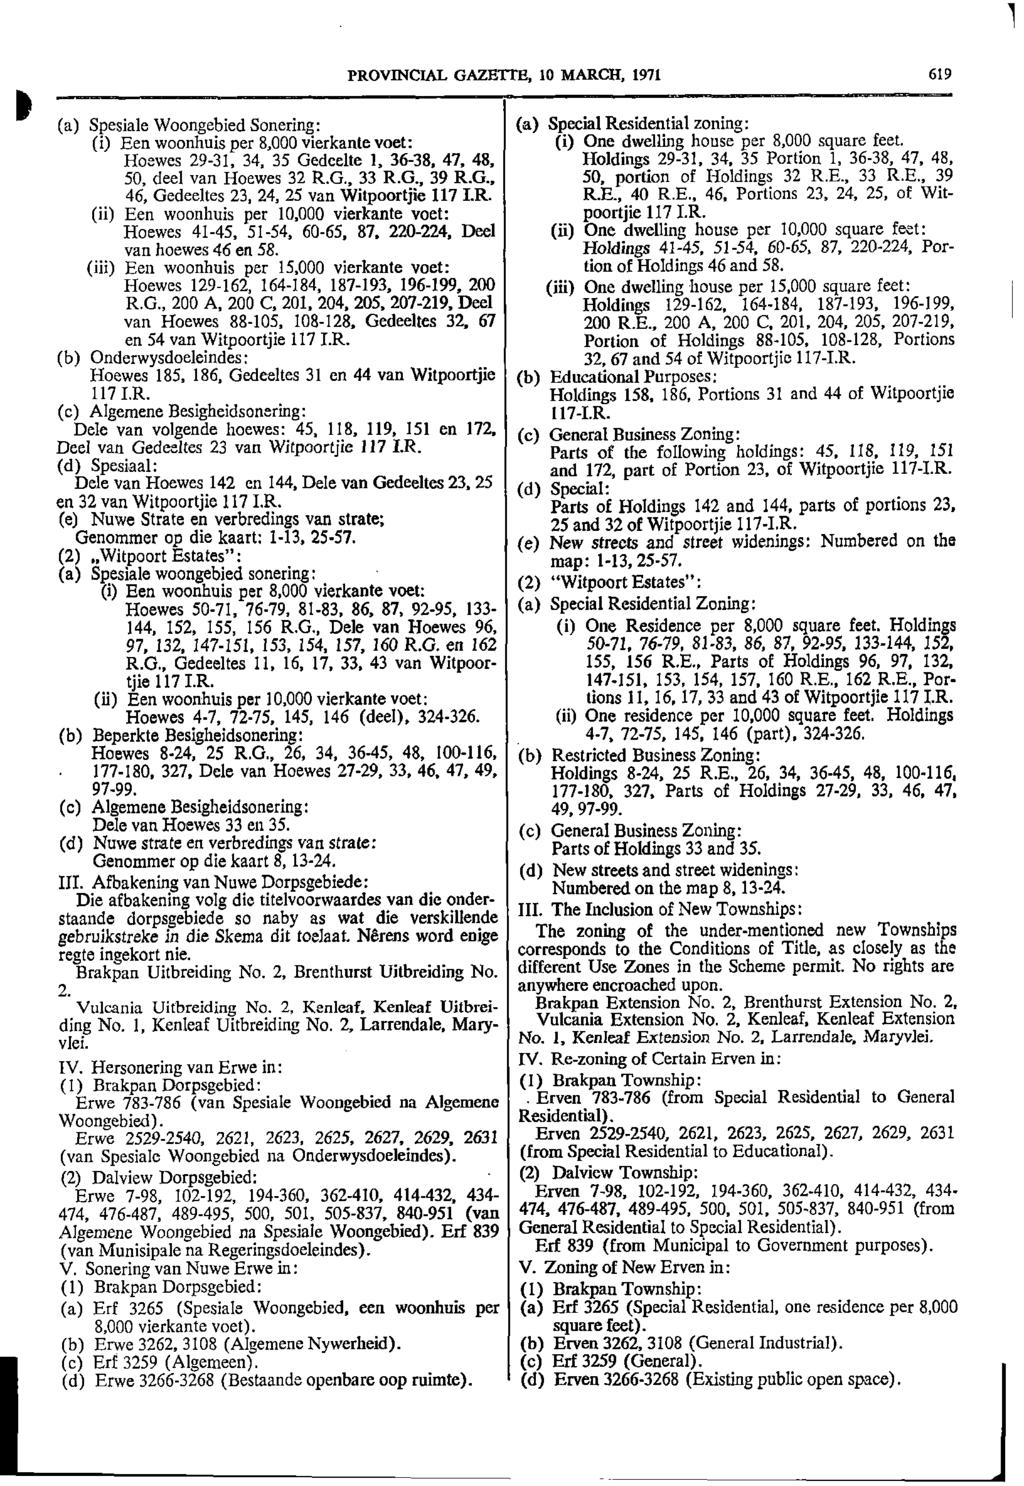 1 PROVINCIAL GAZETTE 10 MARCH 1971 619 (a) Spesiale Woongebied Sonering: (a) Special Residential zoning: (i) Een woonhuis per 8000 vierkante voet: (i) One dwelling house per 8000 square feet Hoewes